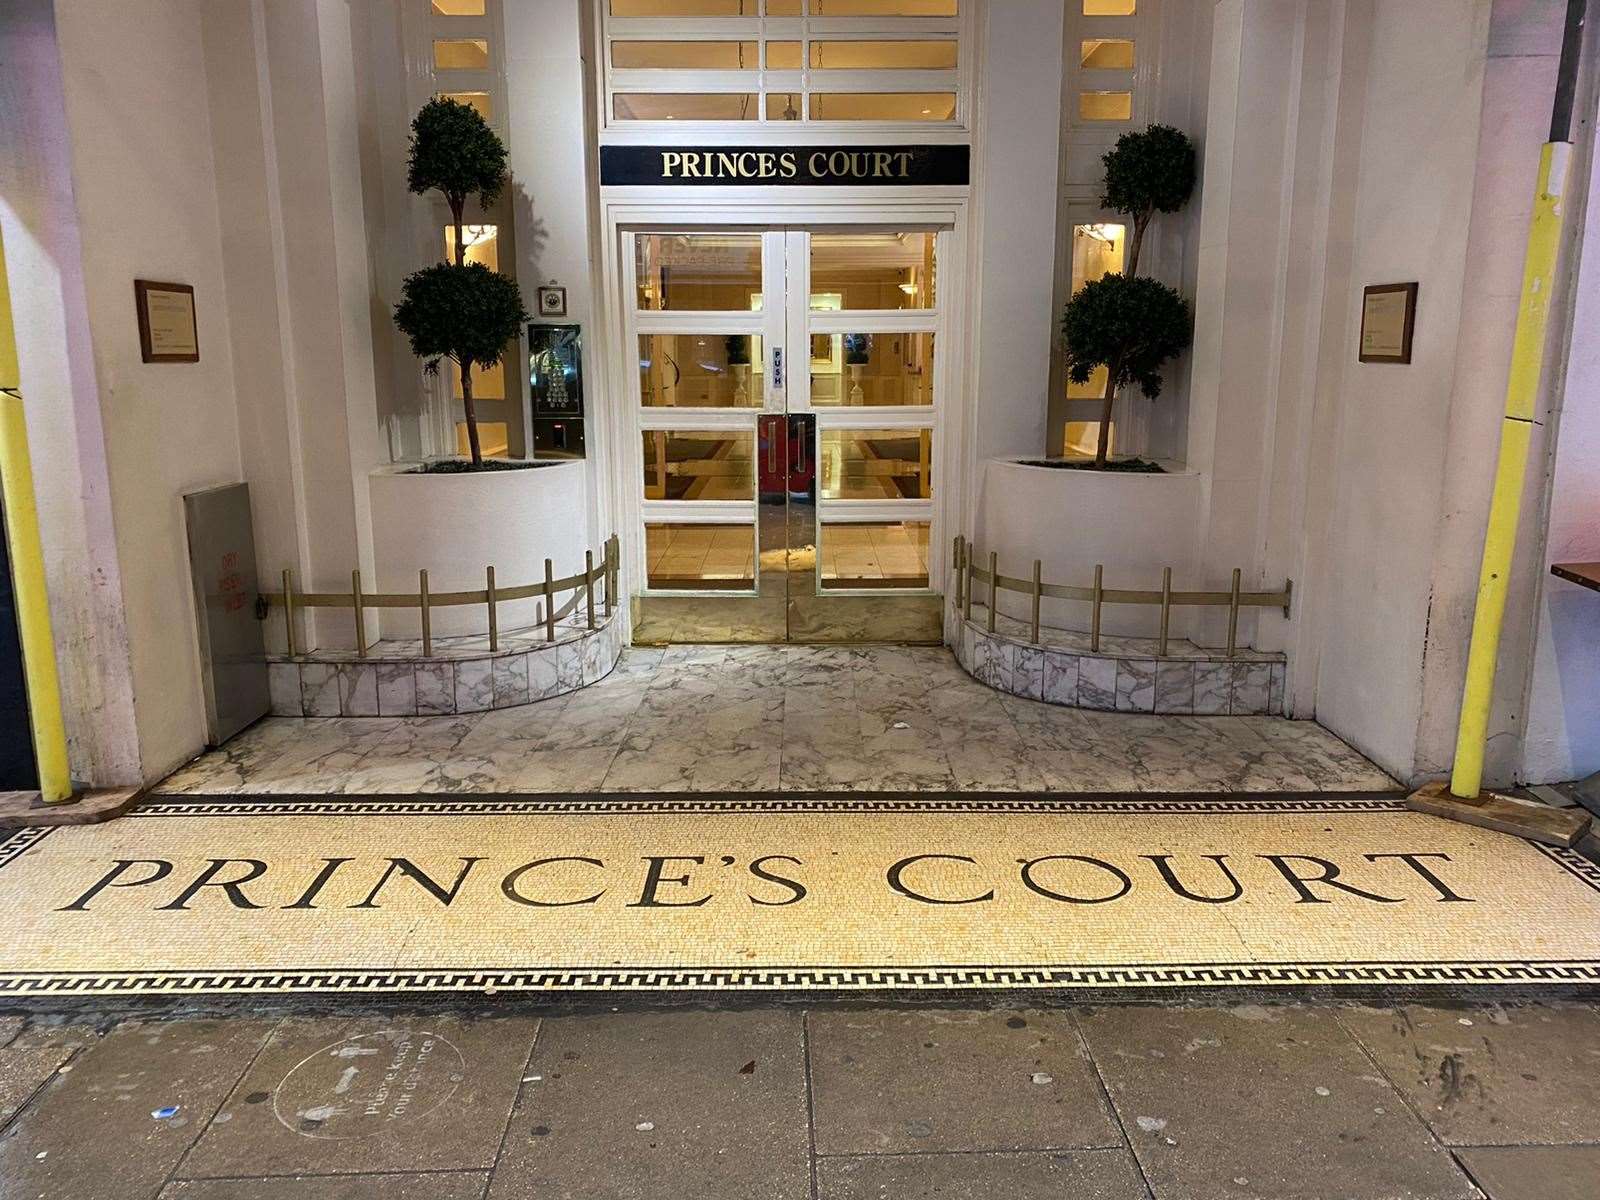 Princes Court in Knightsbridge, the location of Flat M, one of the seized properties (NCA/PA)